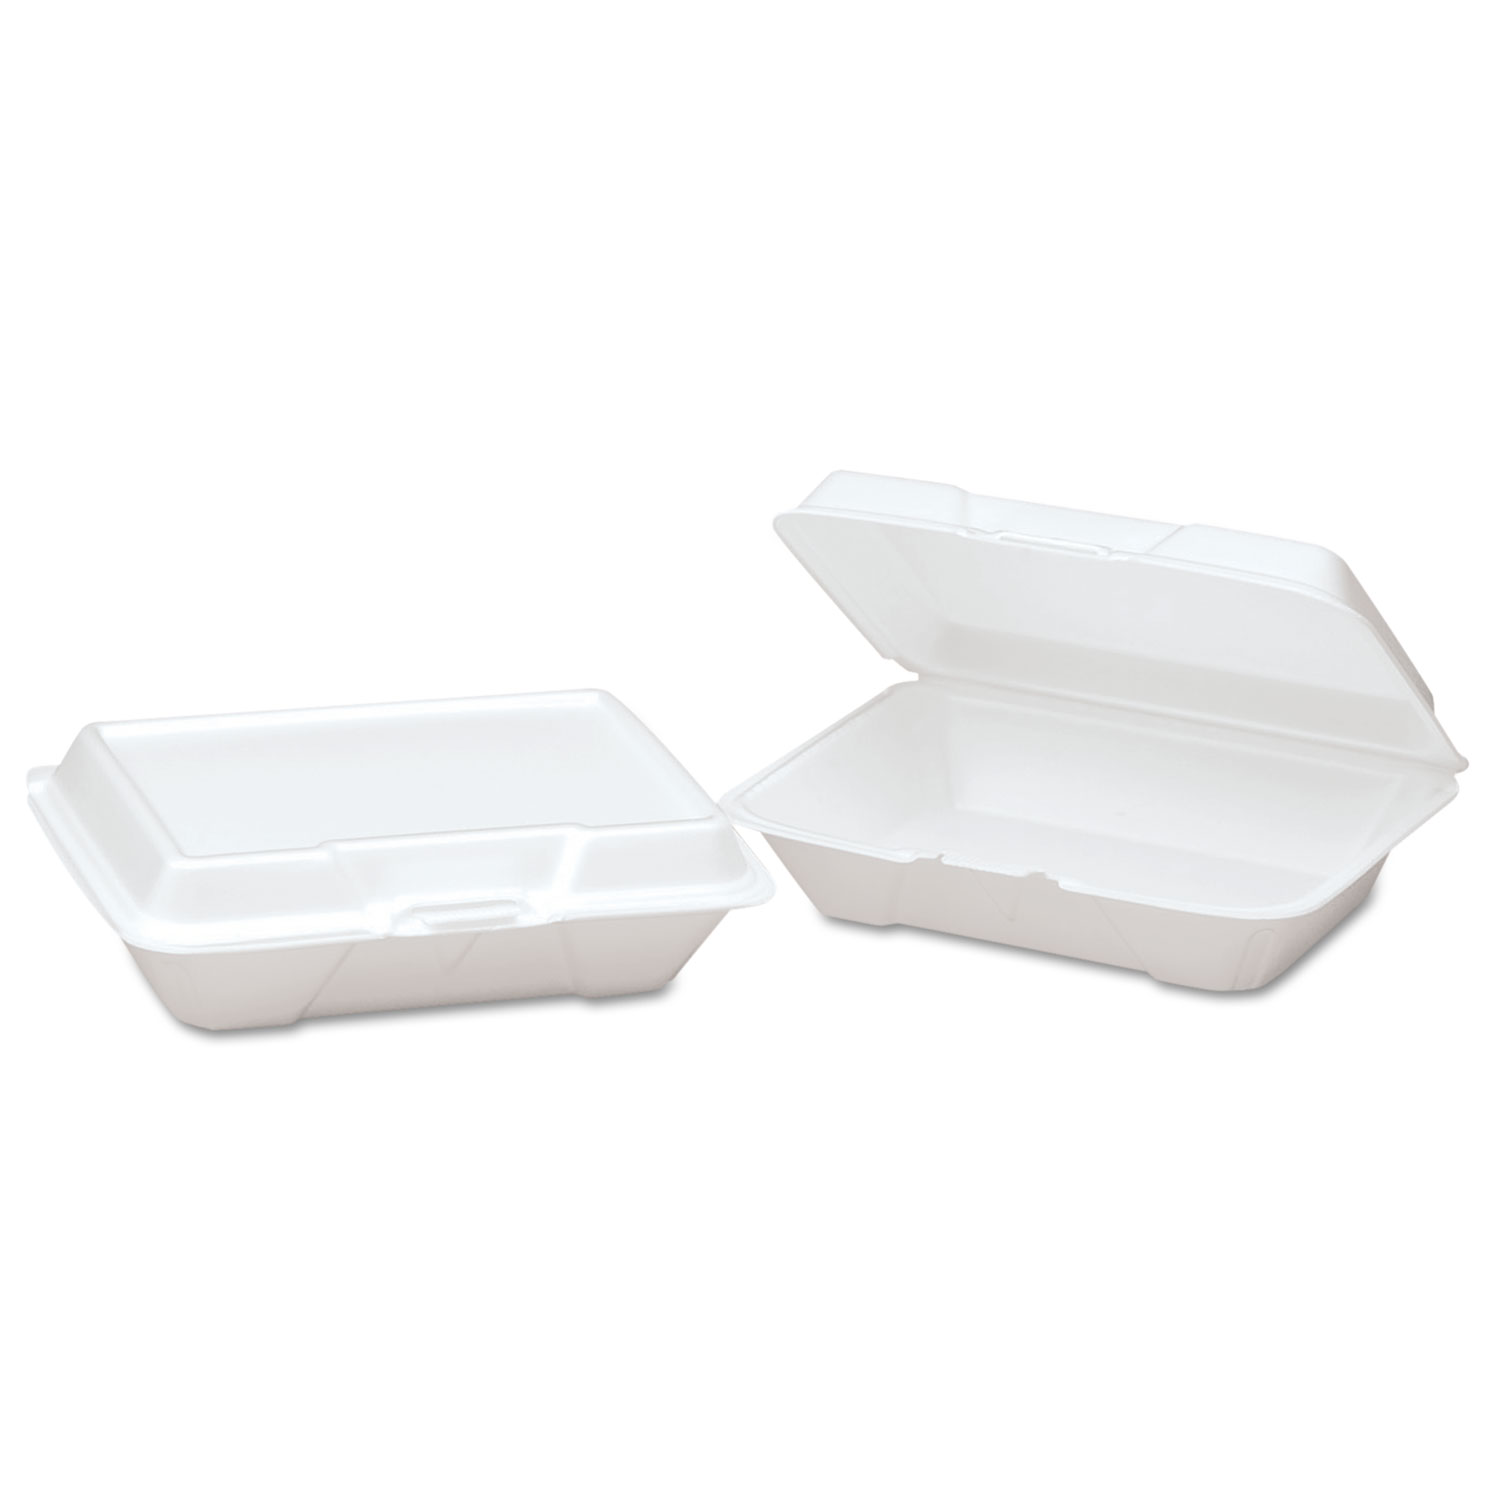  Genpak 20600--- Foam Hinged Carryout Container, Shallow, 9-1/5x6-1/2x2-8/9, White, 100/BG, 2/CT (GNP20600) 